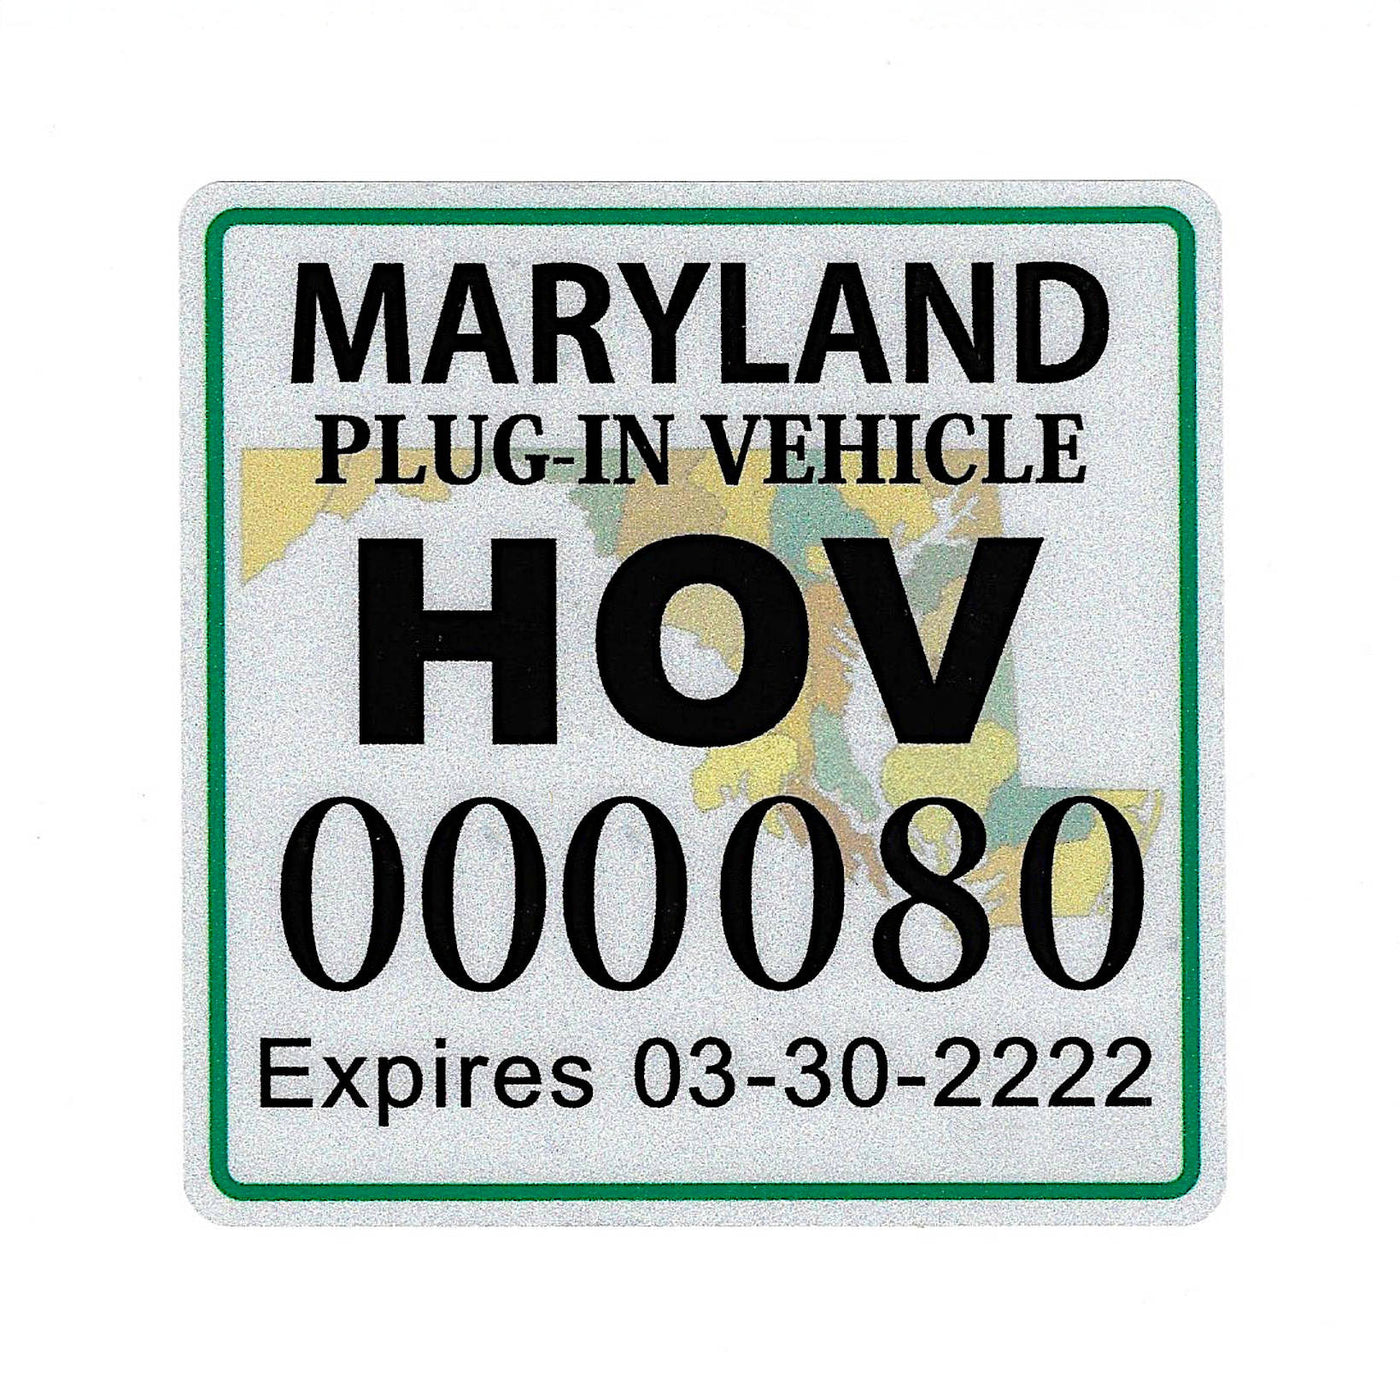 Maryland HOV Stickers Protection Film